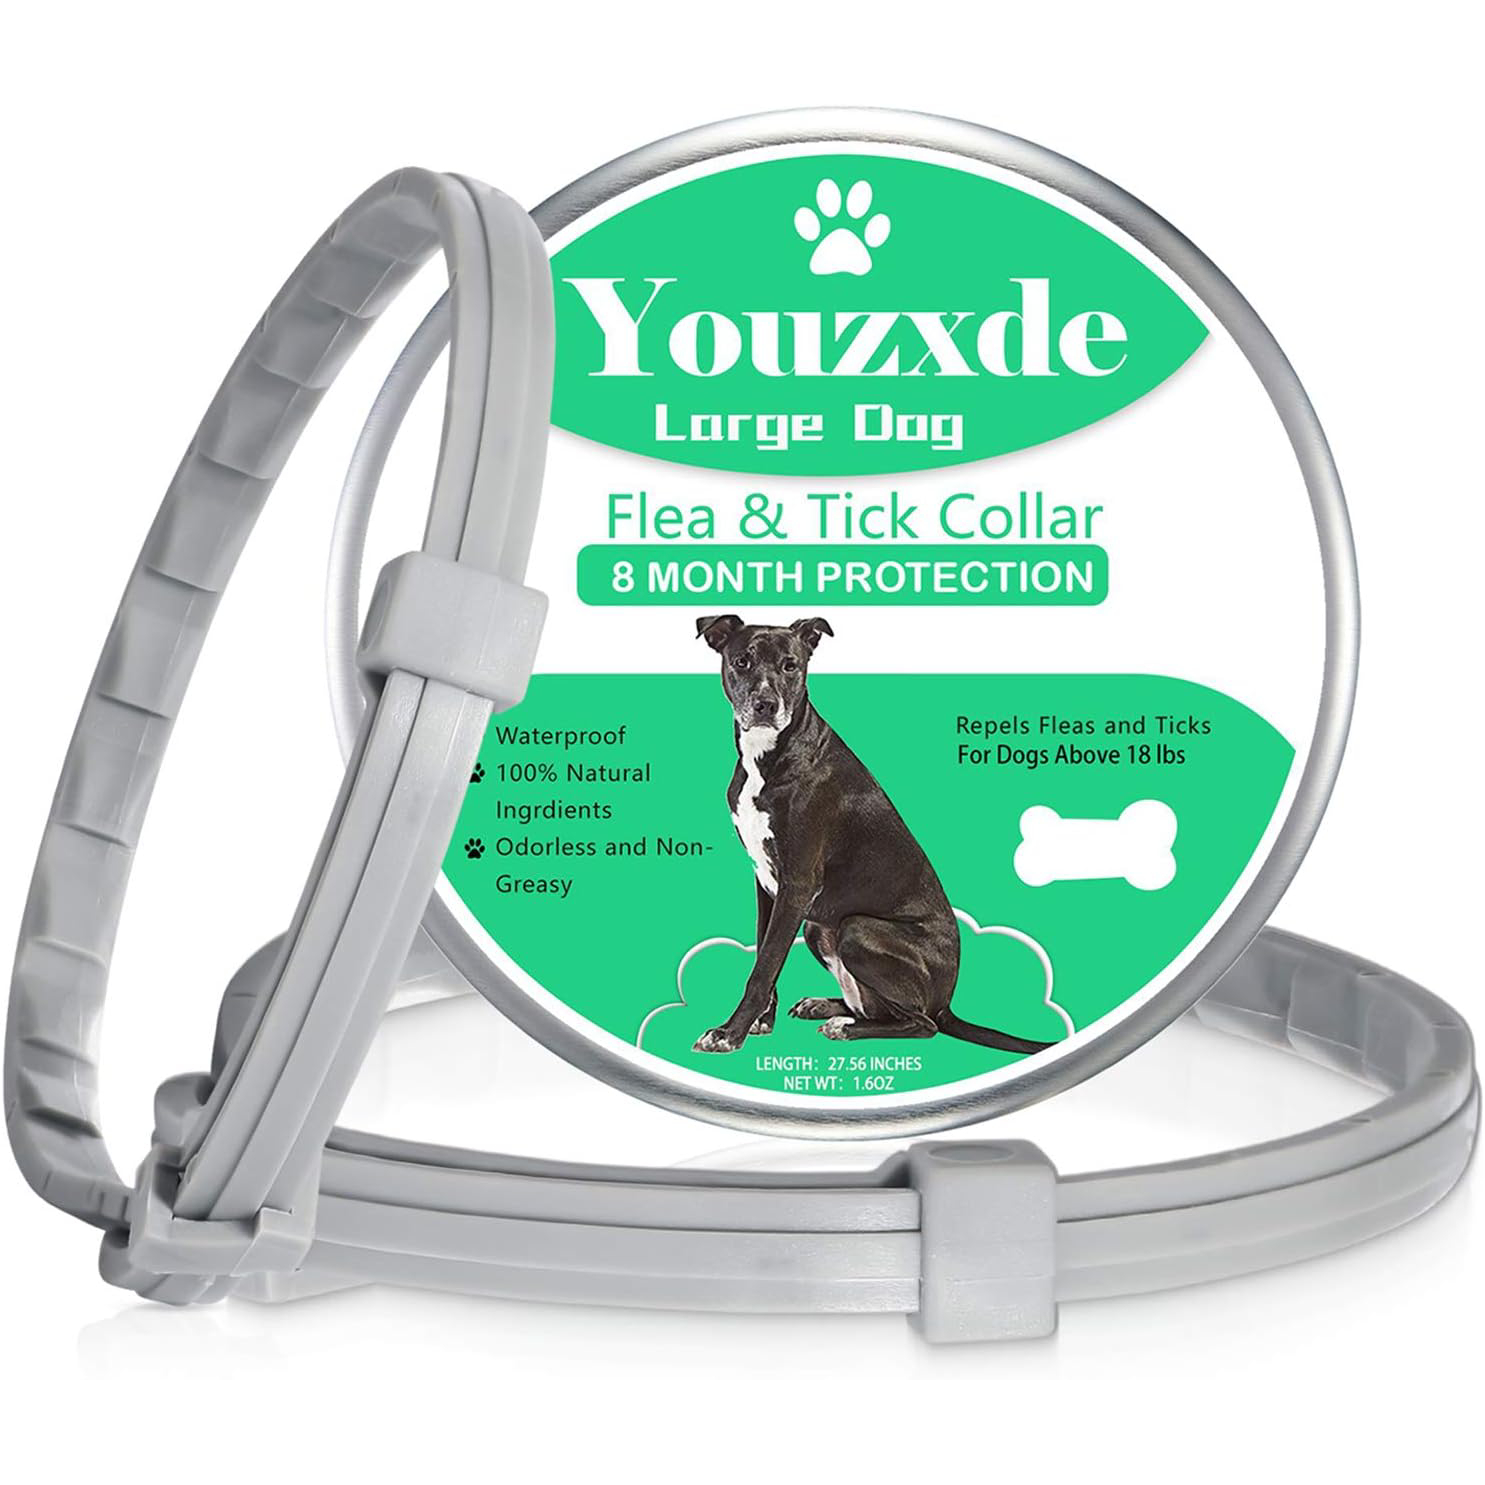 Youzxde Allergy-Free Tick and Flea Collar for Large Dogs